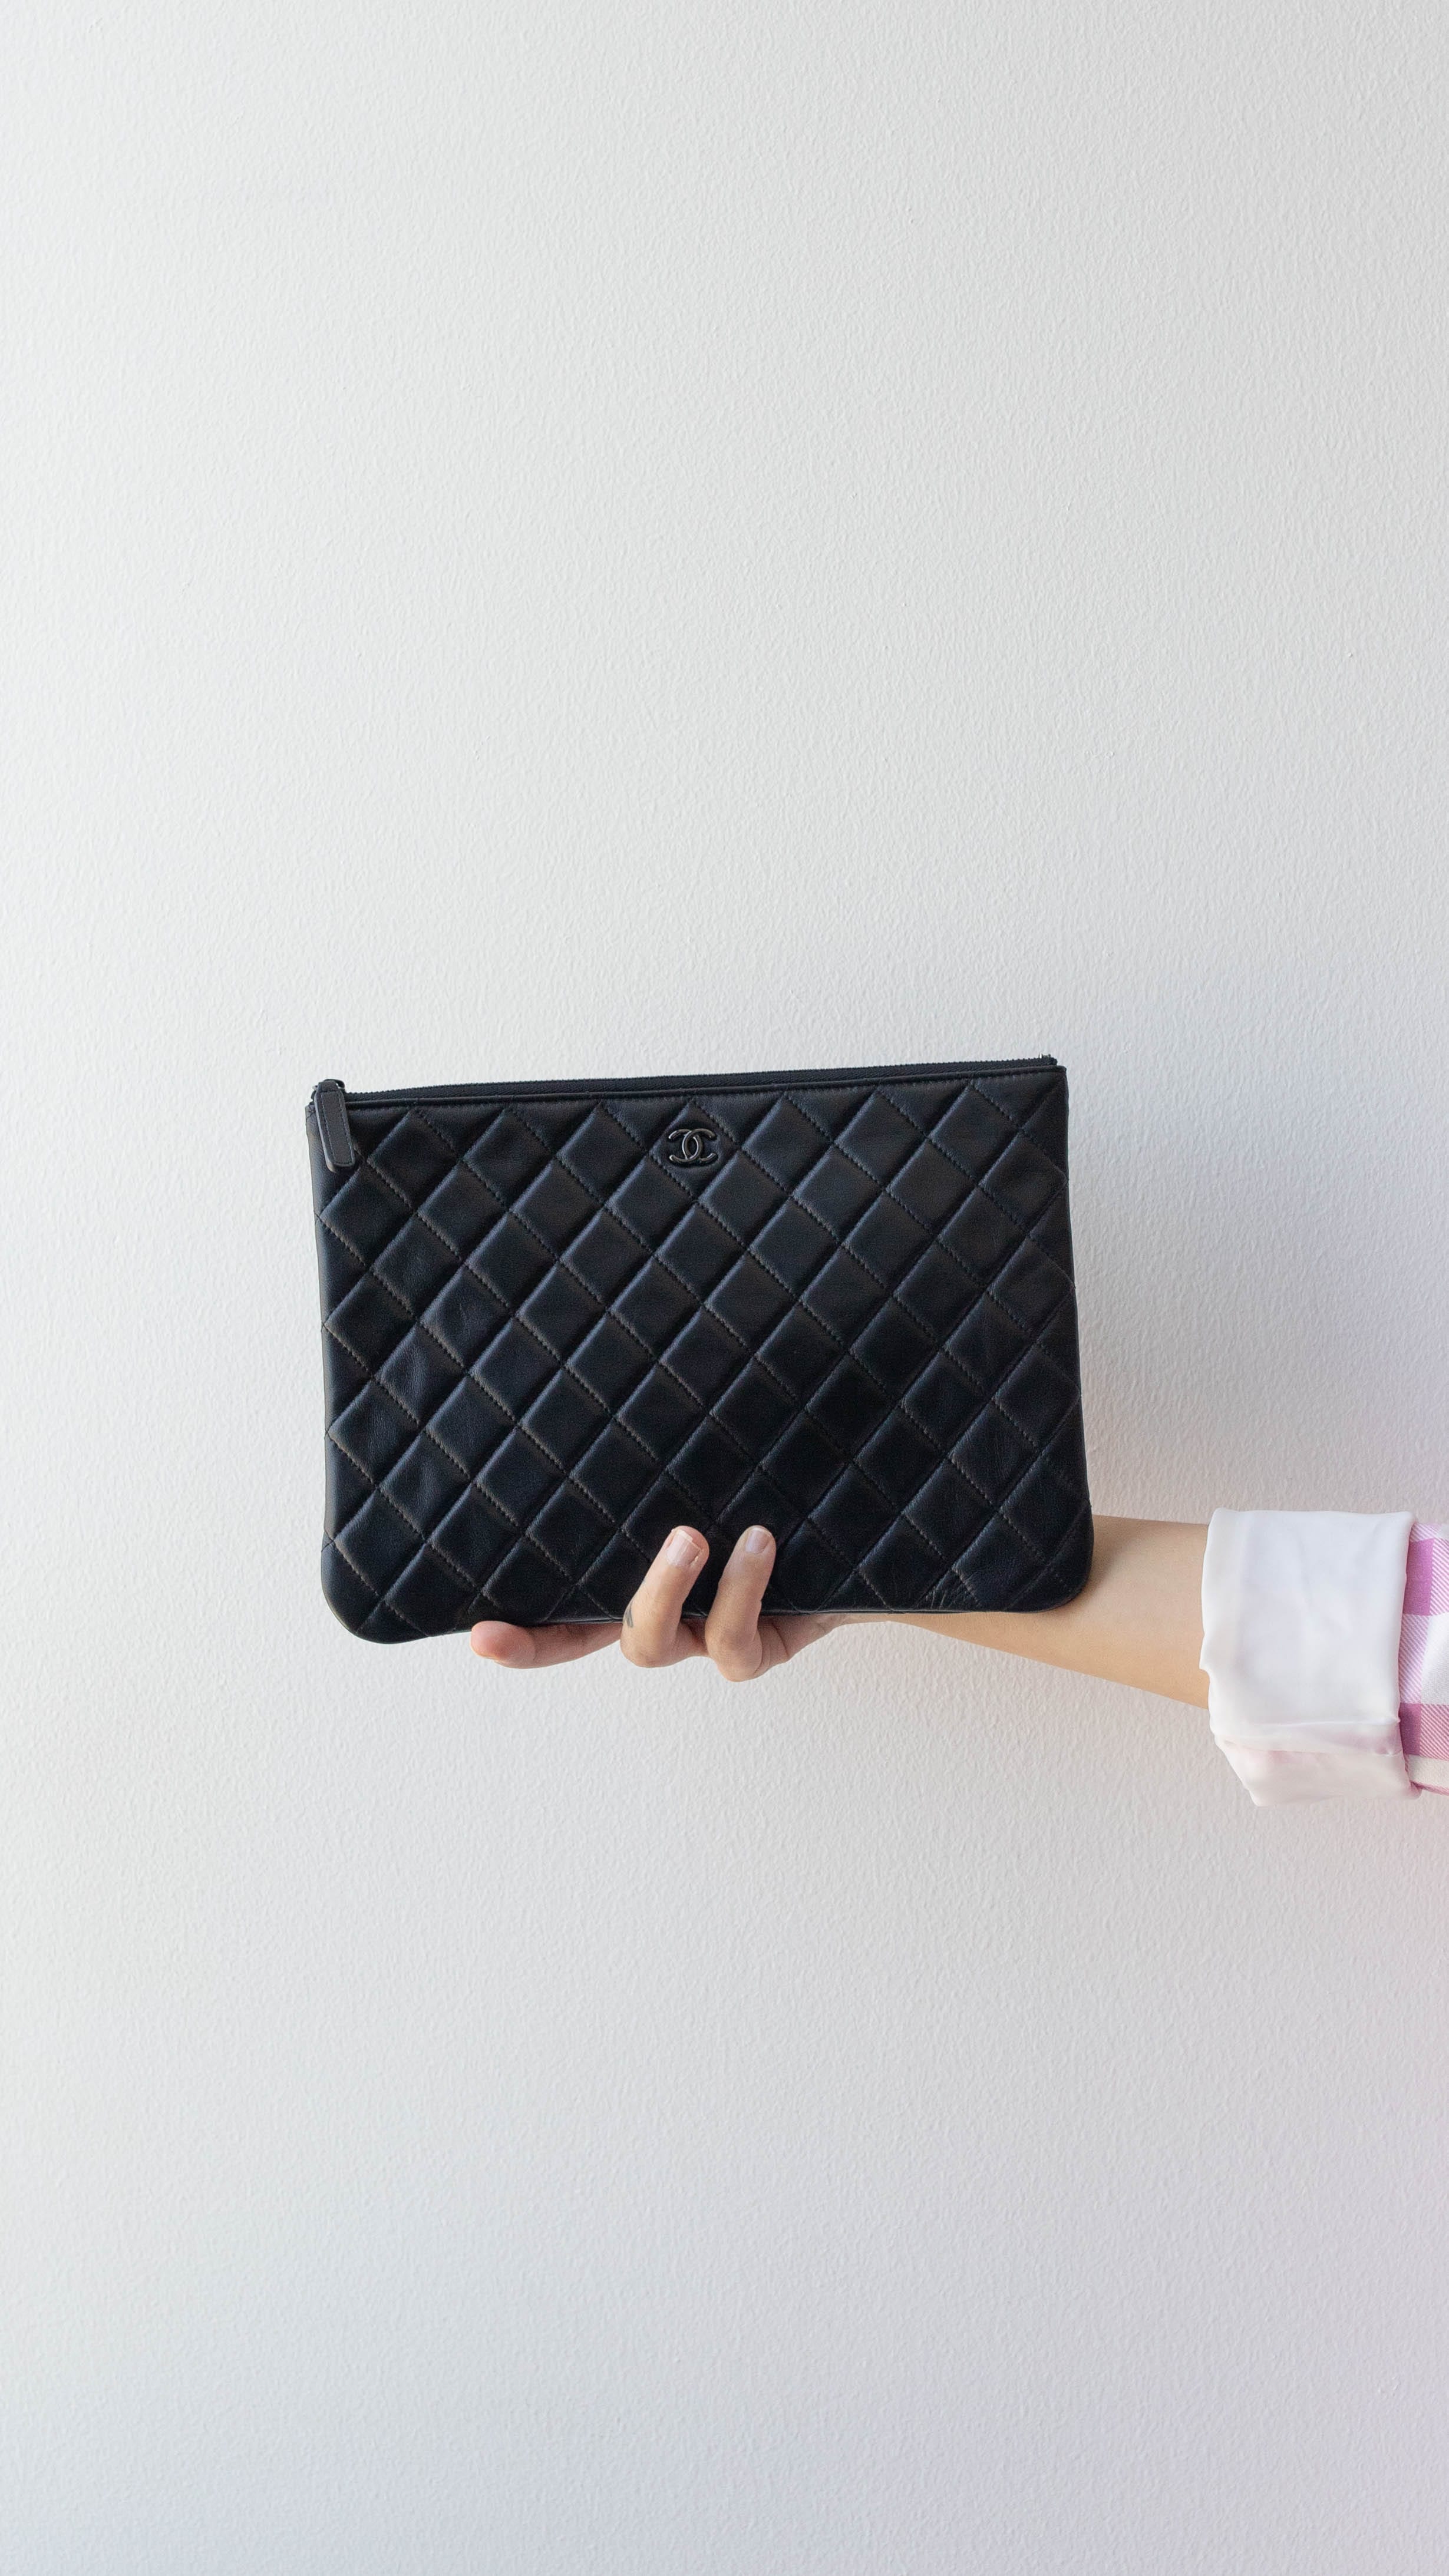 Clutch Bags Chanel